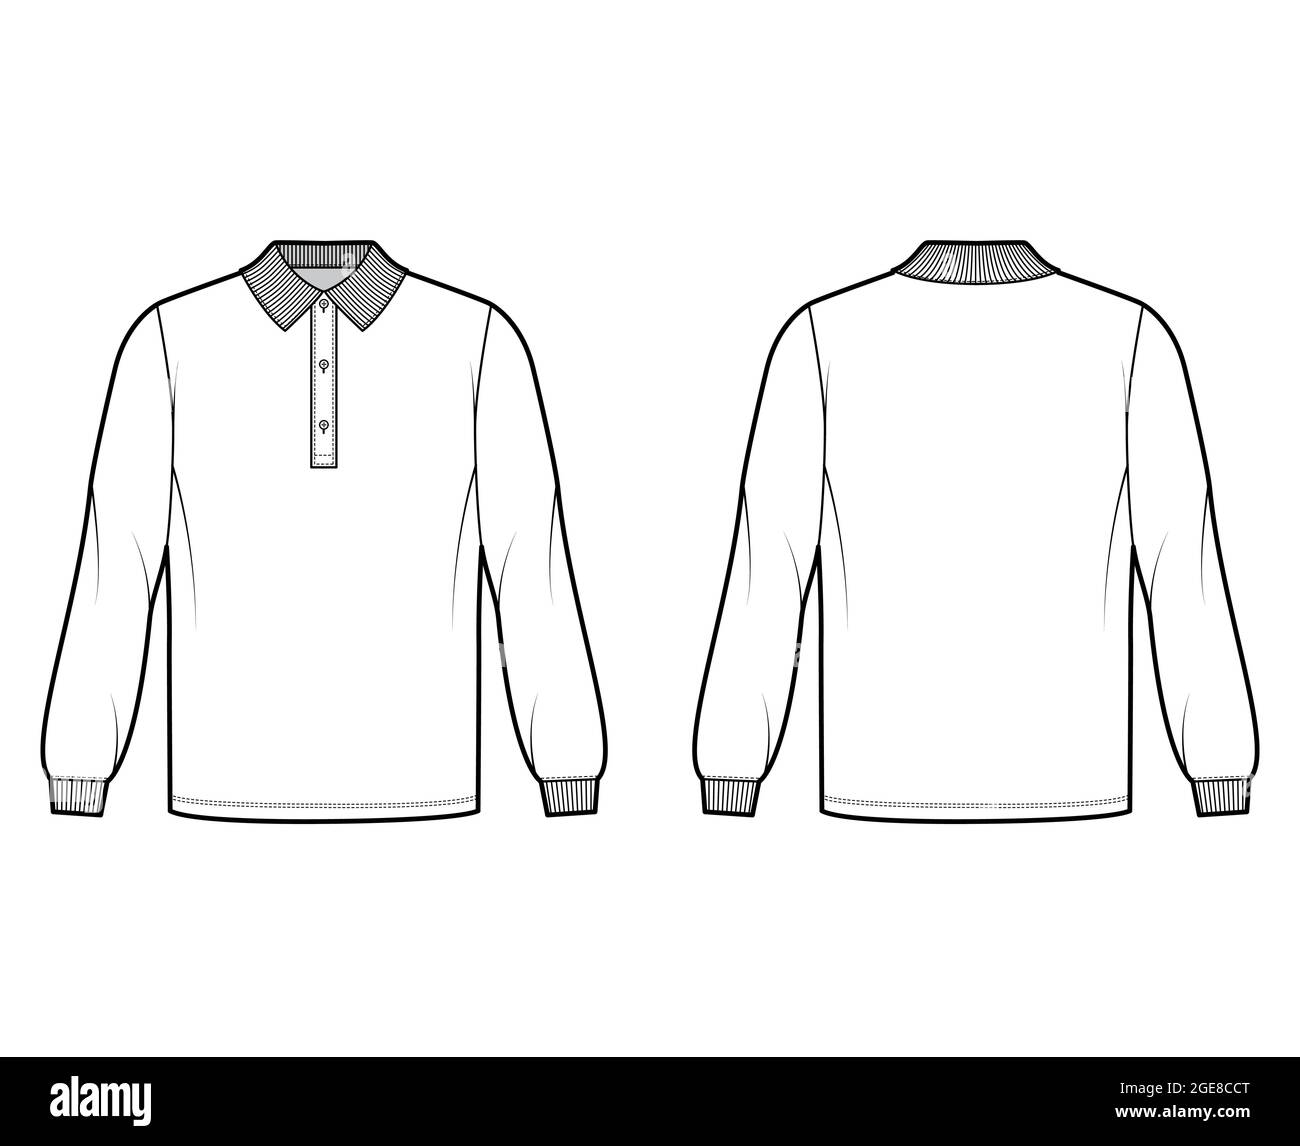 Shirt polo oversized technical fashion illustration with long sleeves ...